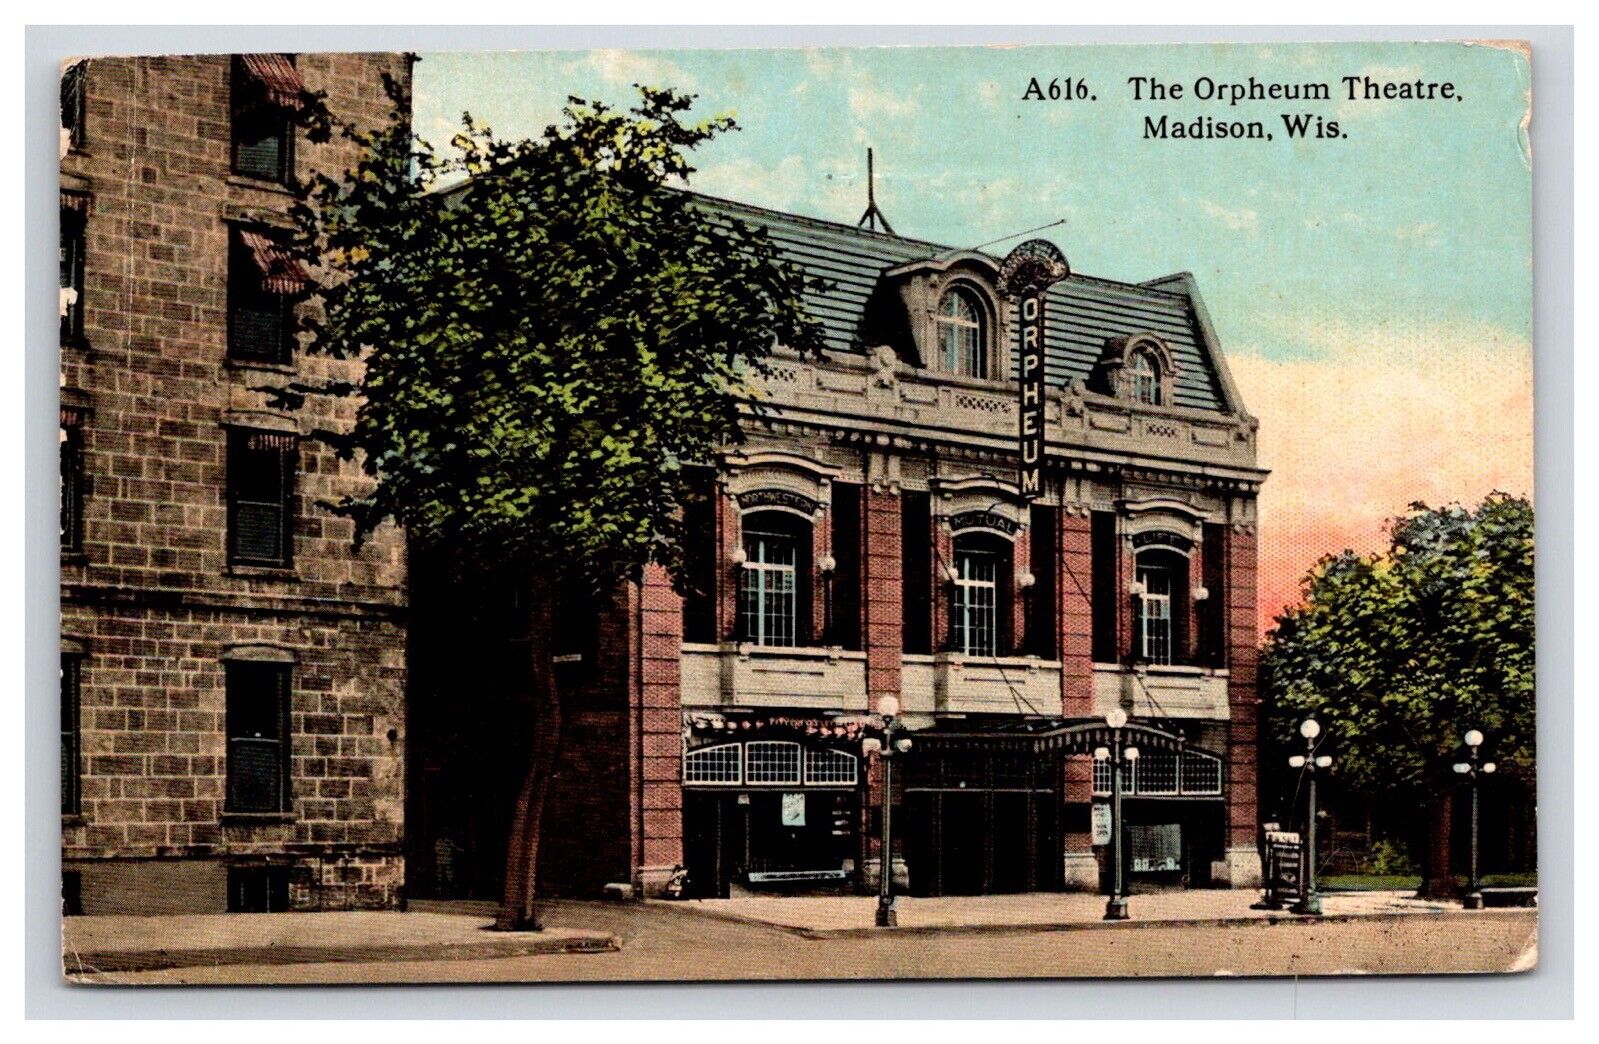 Postcard: WI 1913 The Orpheum Theatre, Madison, Wisconsin - Posted